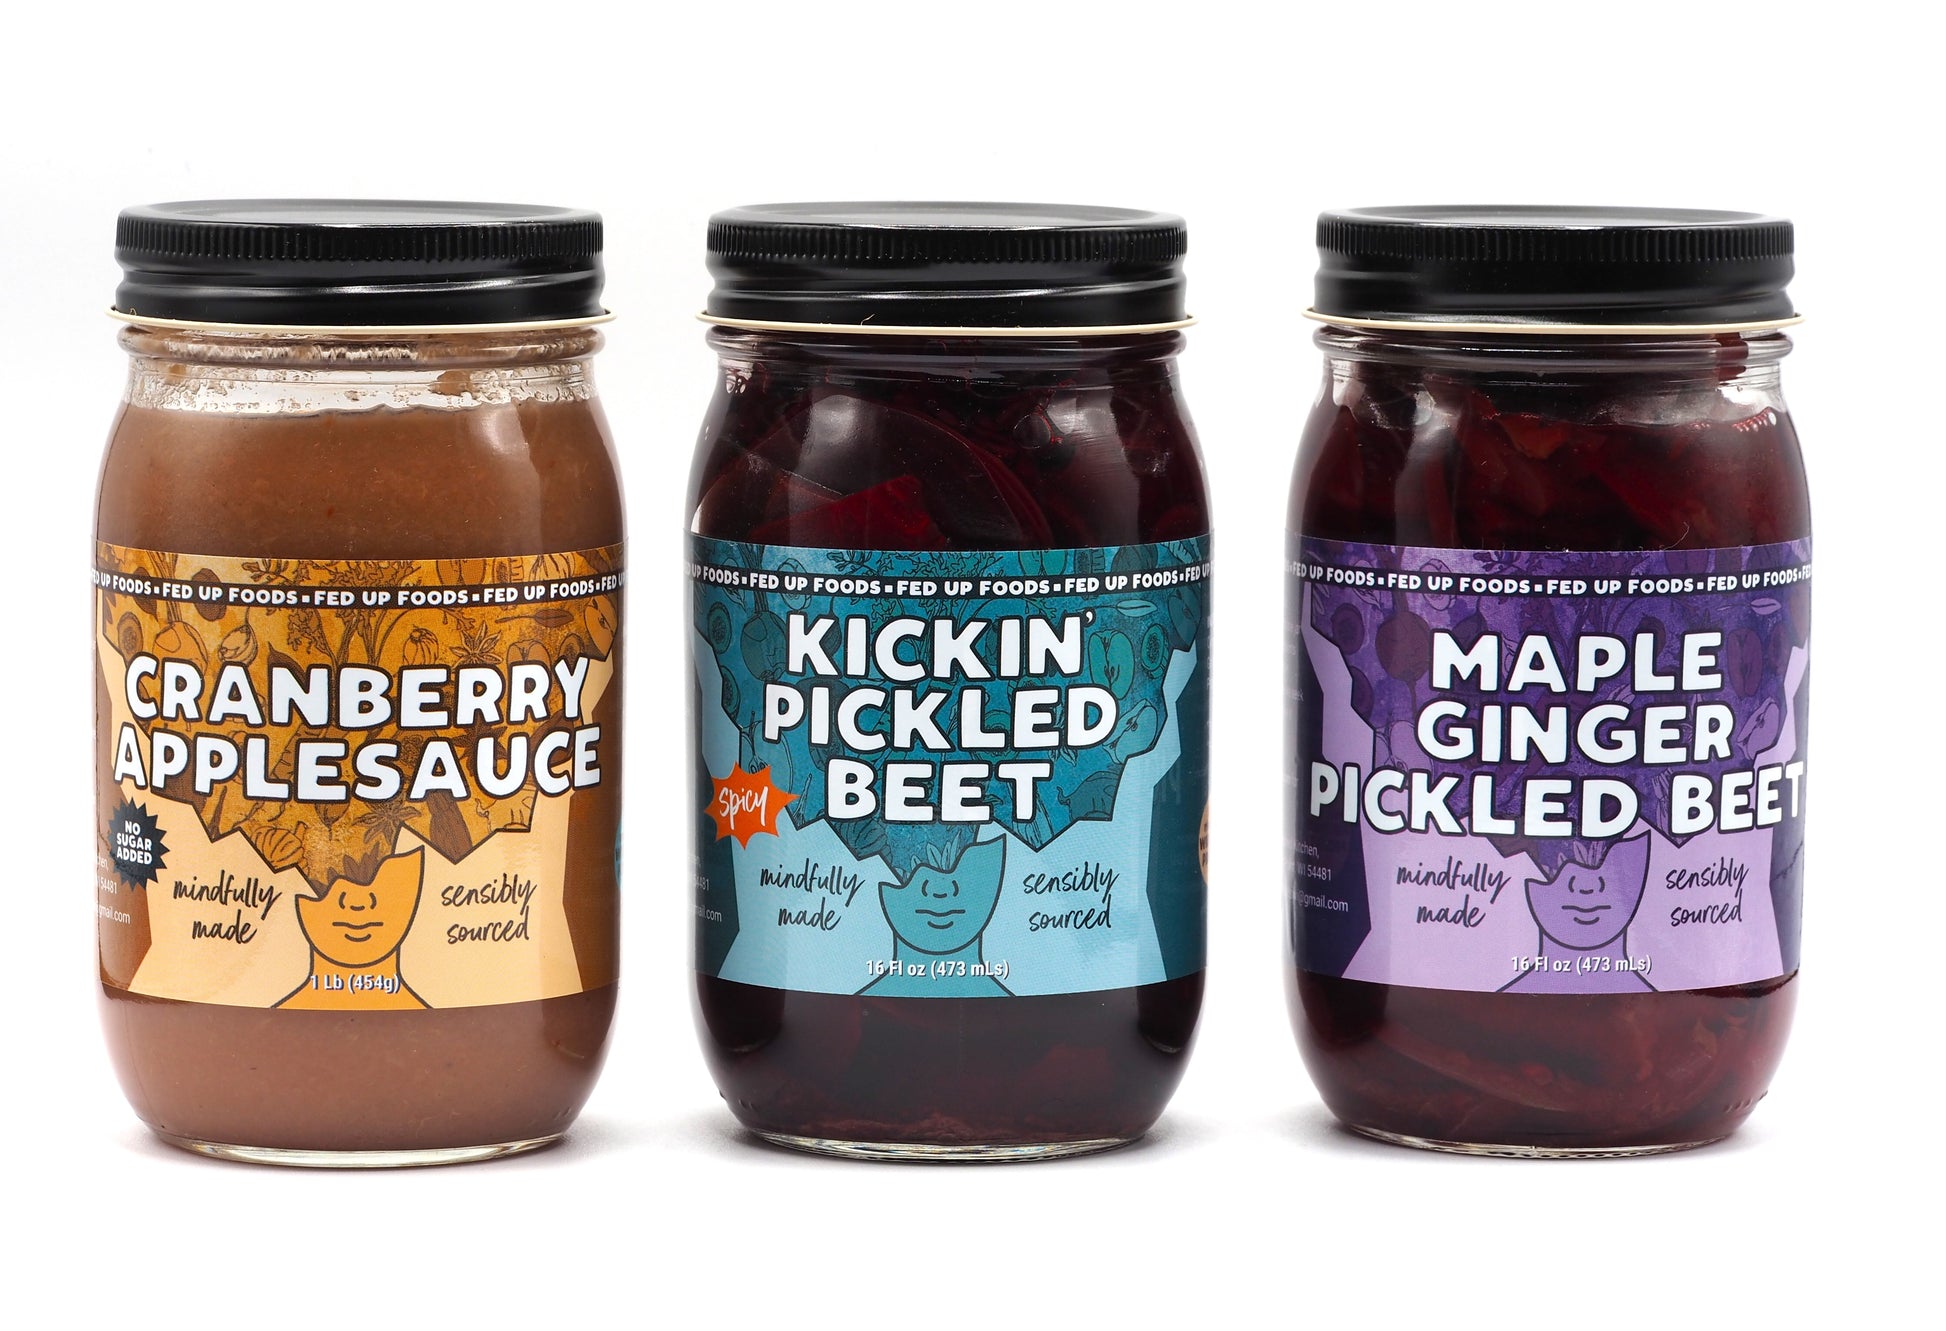 Fed Up Foods Cranberry Applesauce Kickin pickled beet and maple ginger pickled beet in a 3 pack variety pack